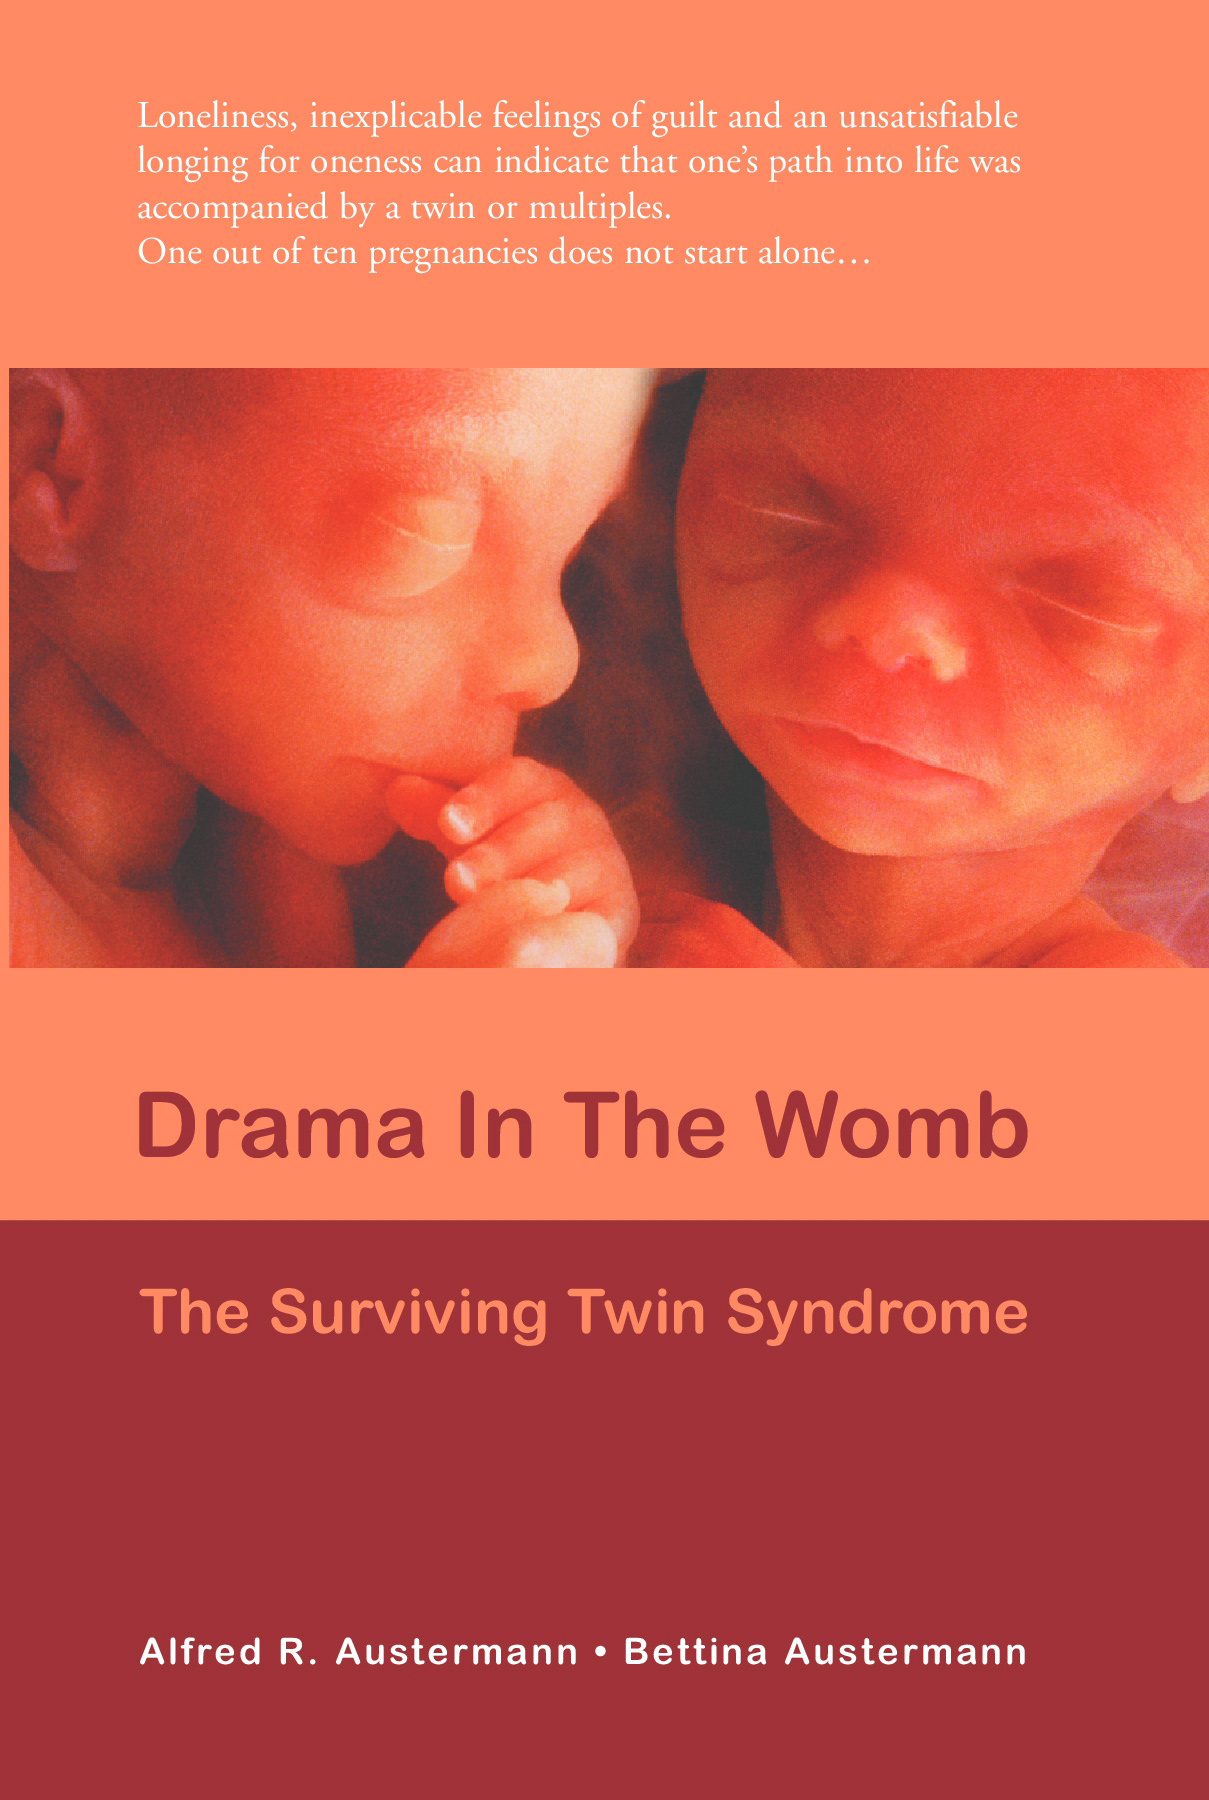 "The Surving Twin Syndrome" 